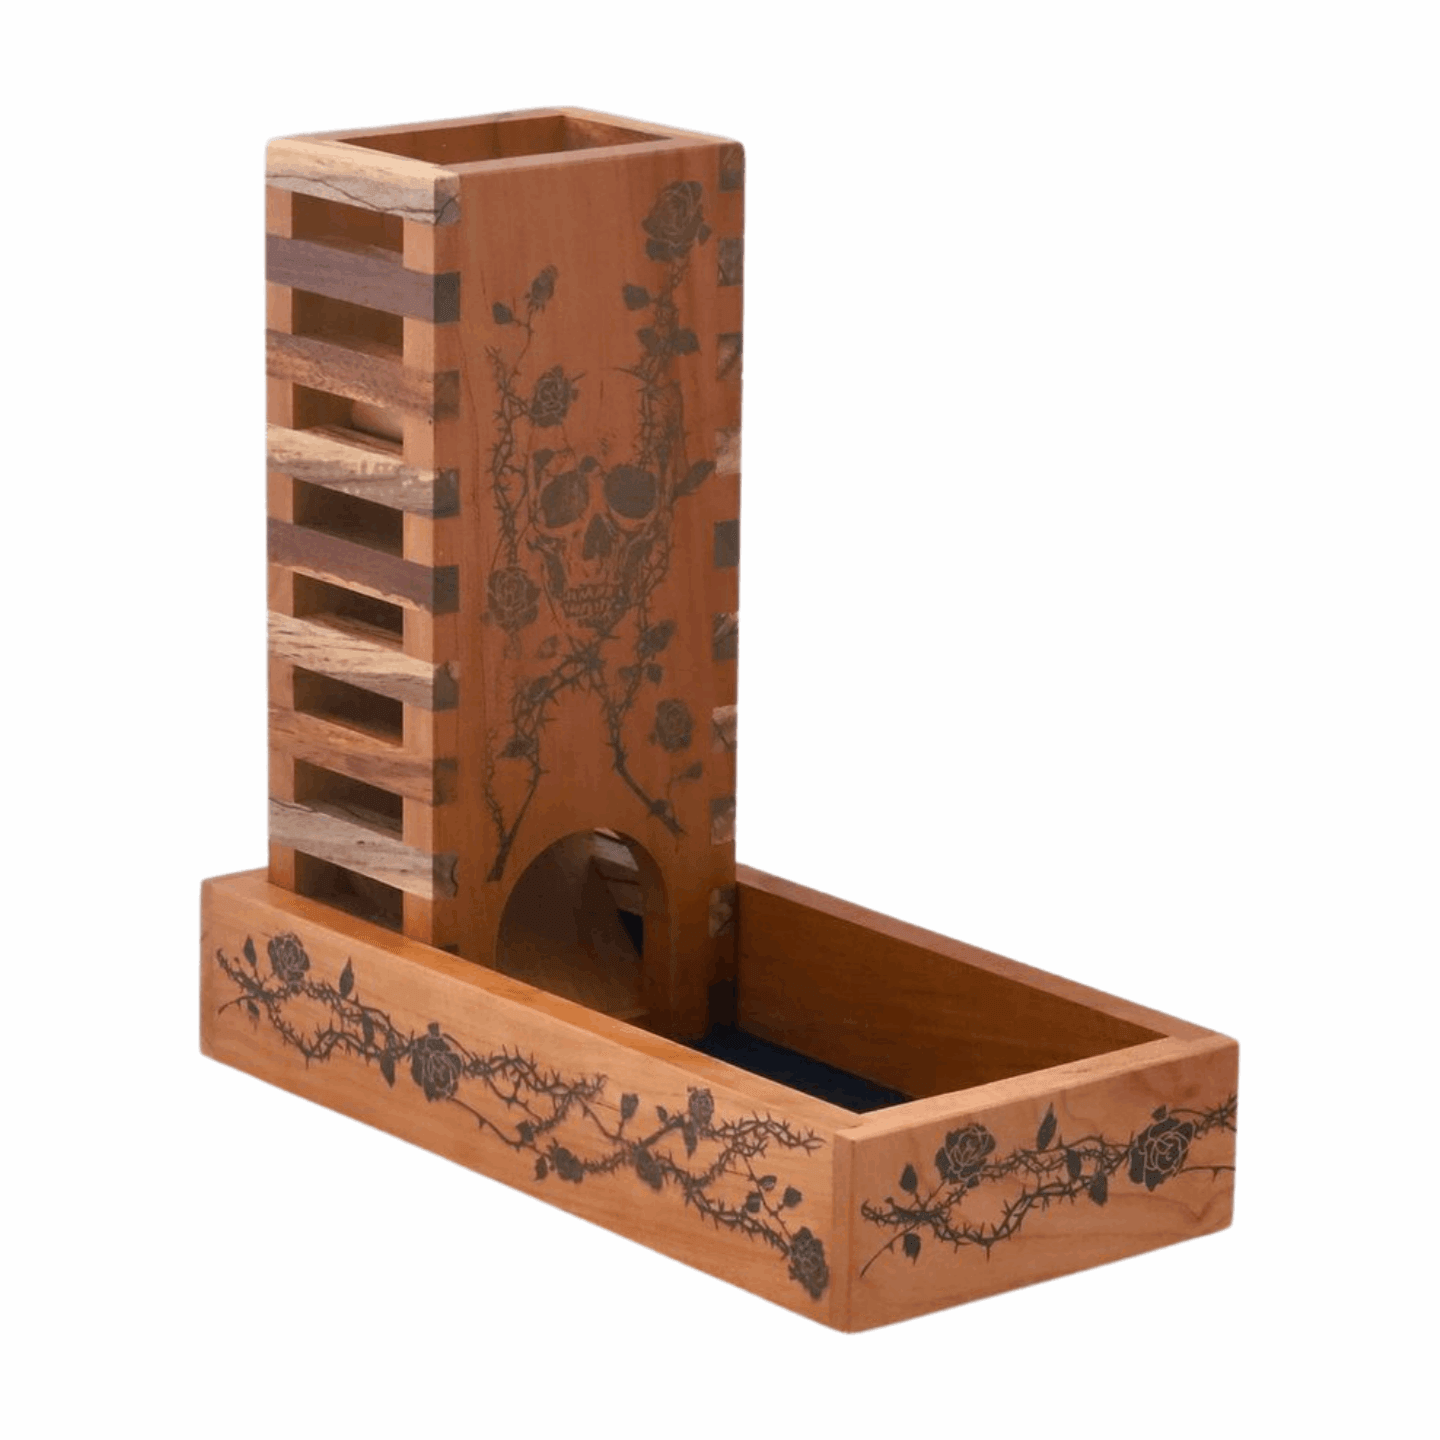 Cherry and Walnut Skeleton Design Dice Tower with Skull and Roses